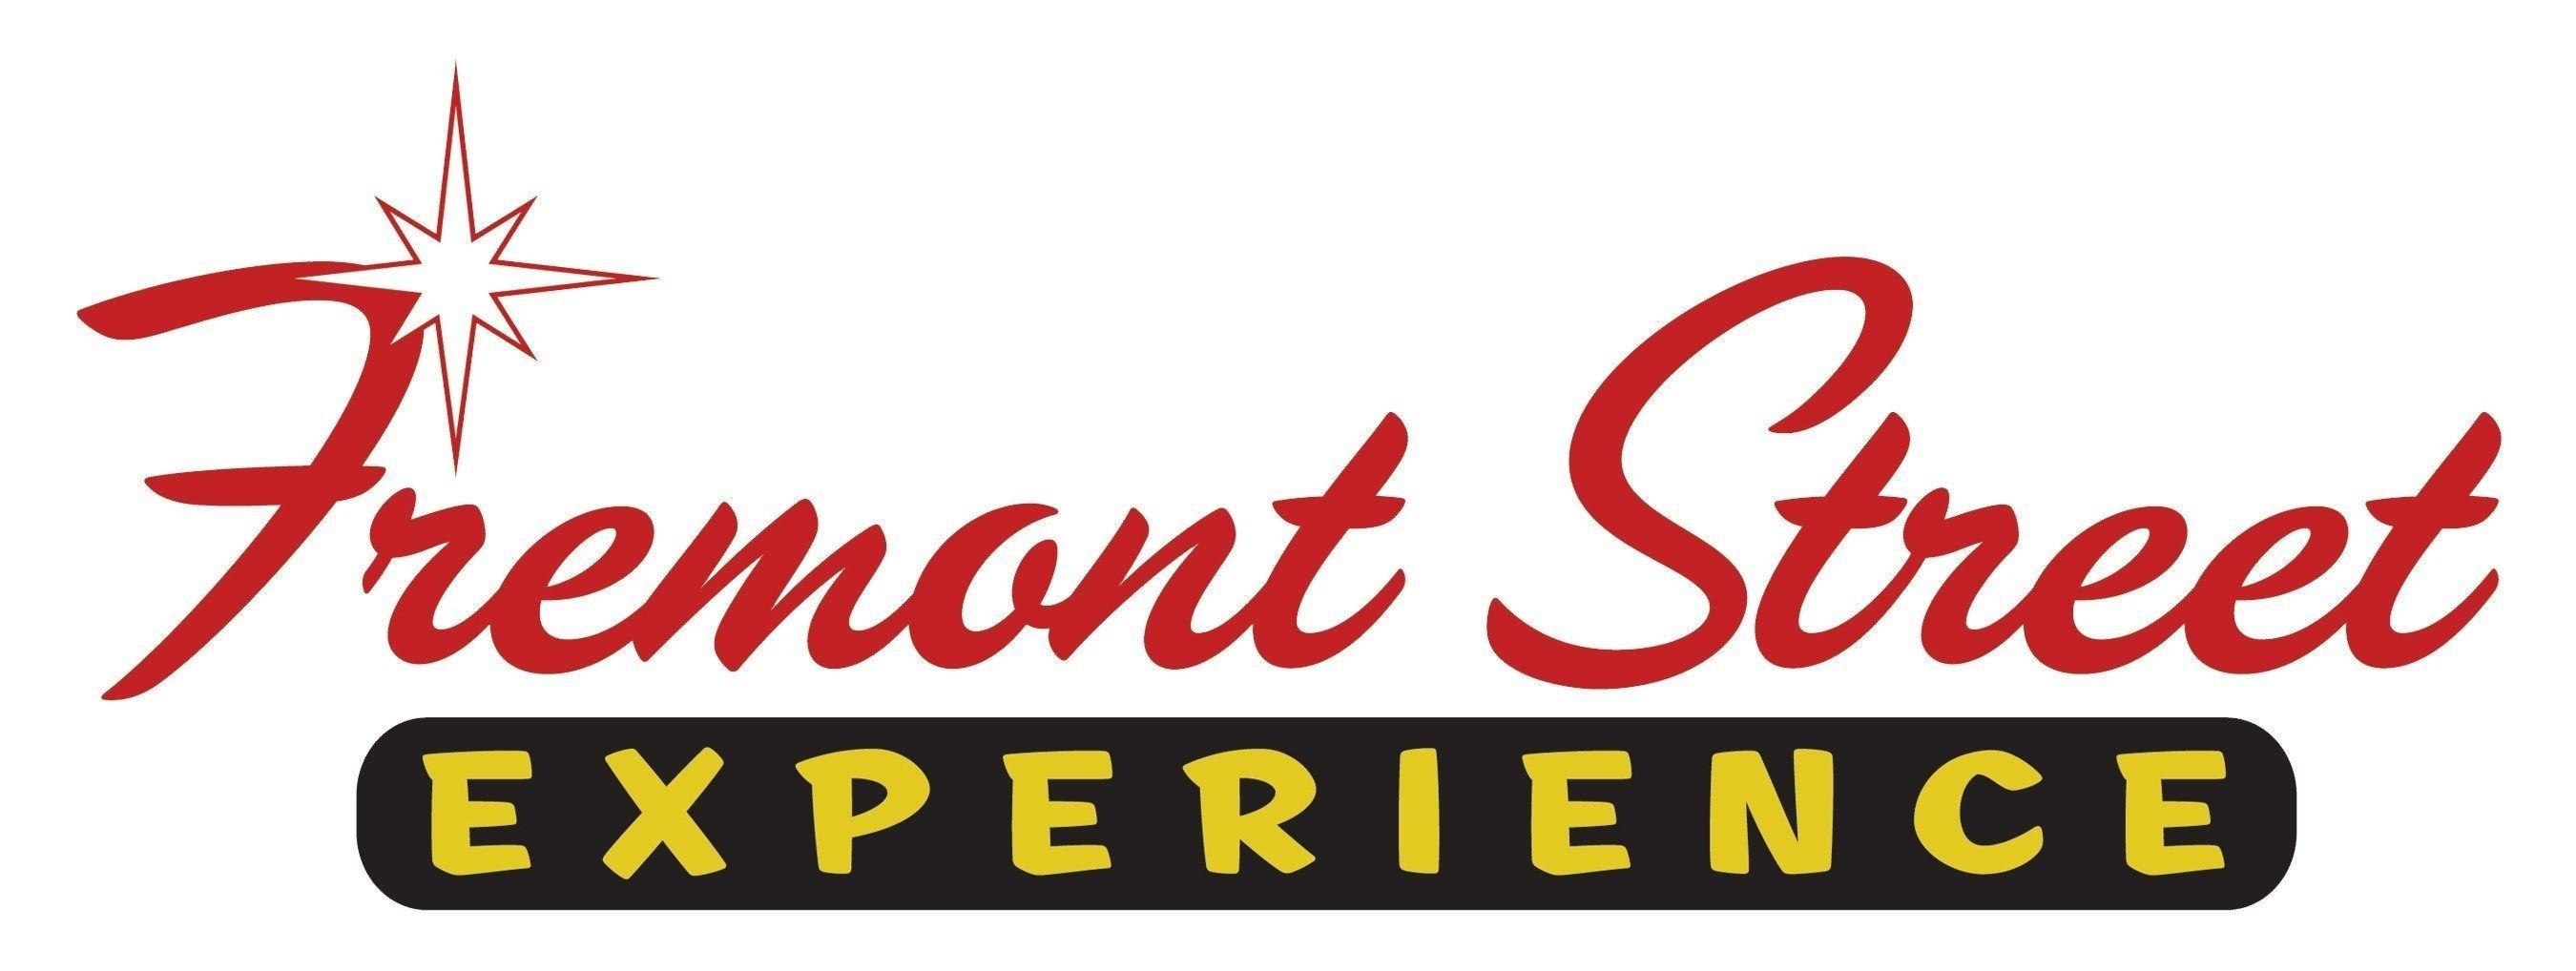 Fremont Street Logo - Toast the New Year at Fremont Street Experience with Downtown